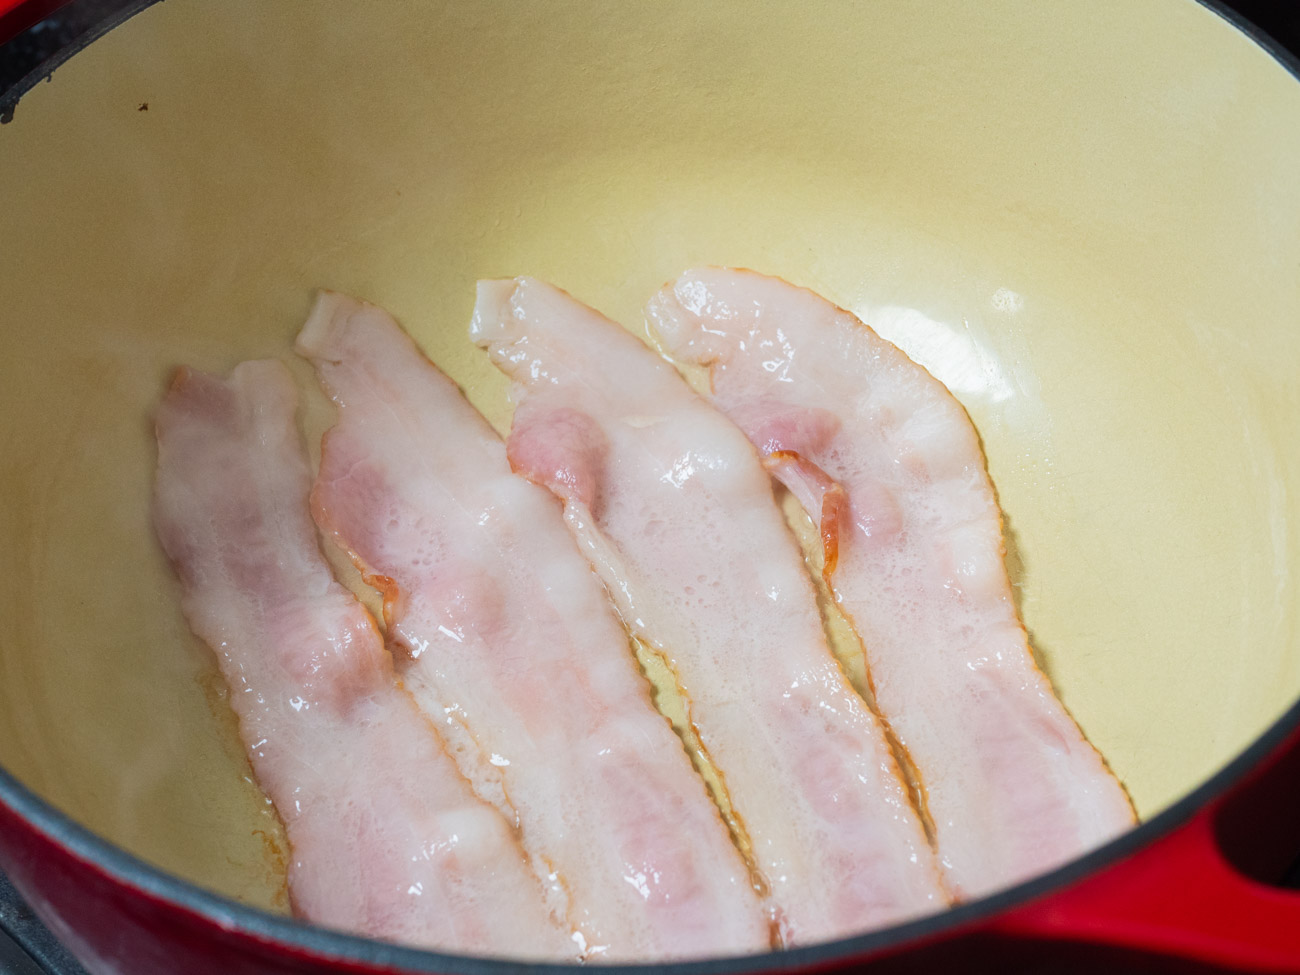 In a large pot, cook bacon until crisp. Transfer to a paper towel lined plate to drain.